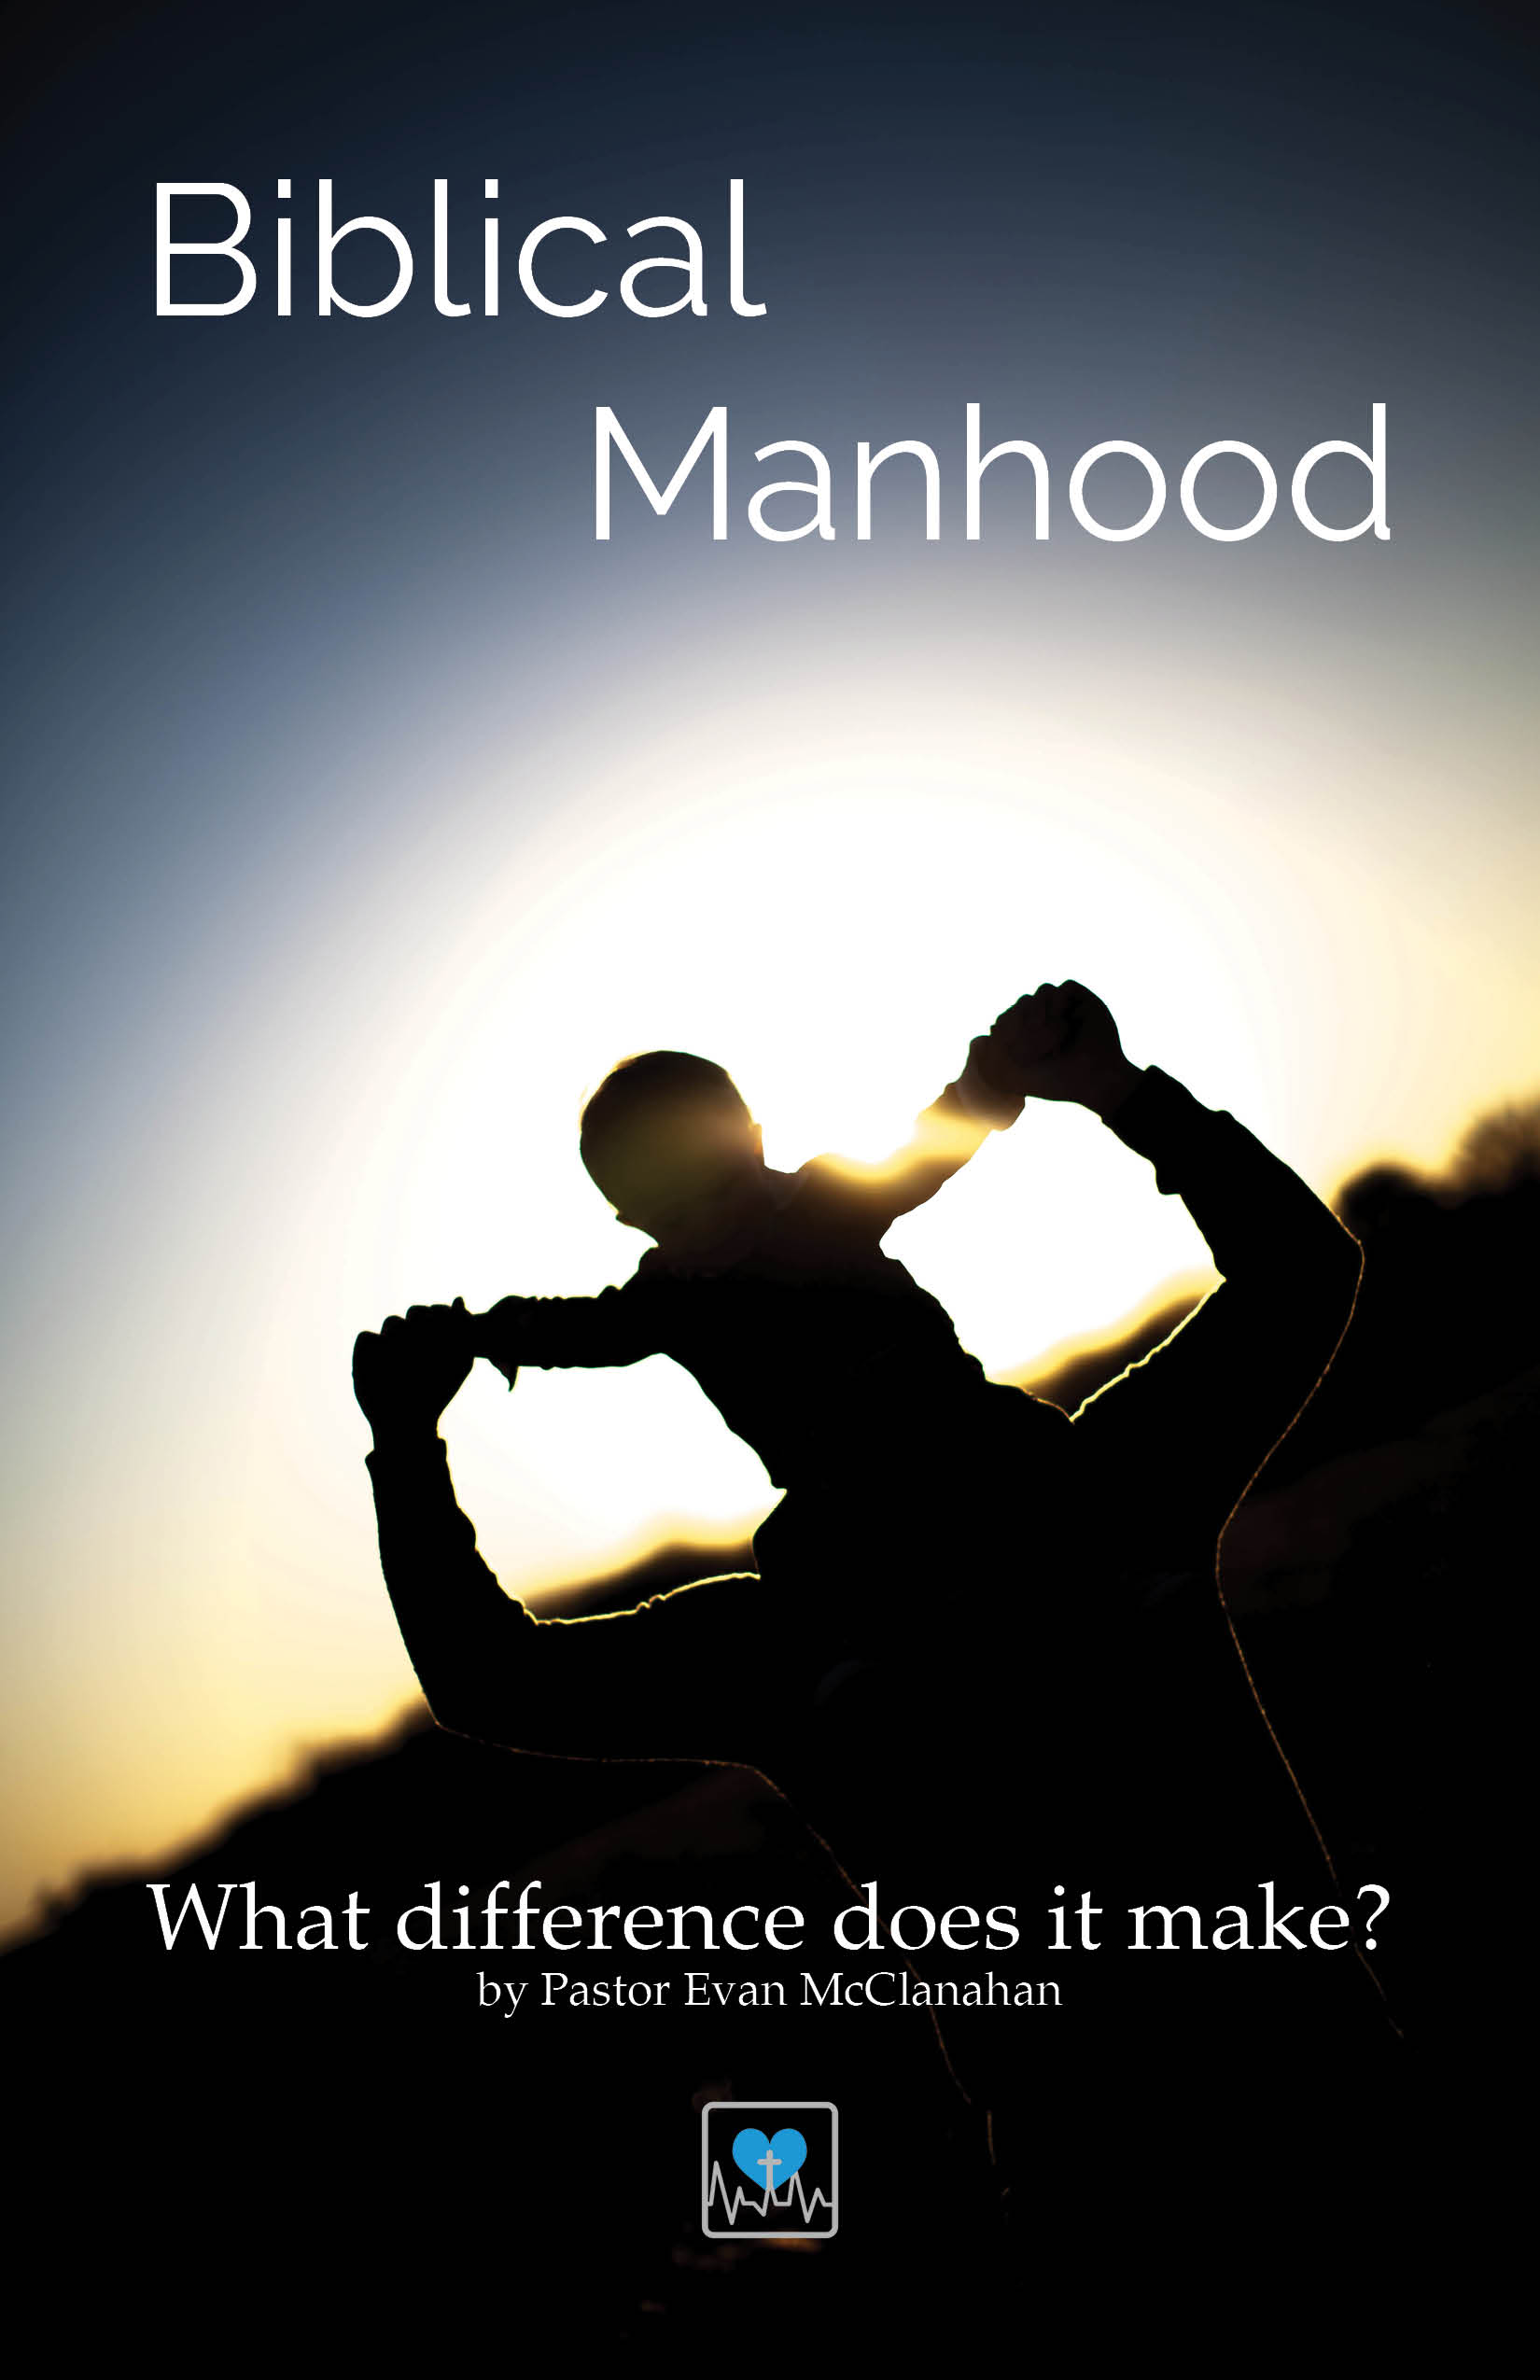 Biblical Manhood – What Difference Does It Make?